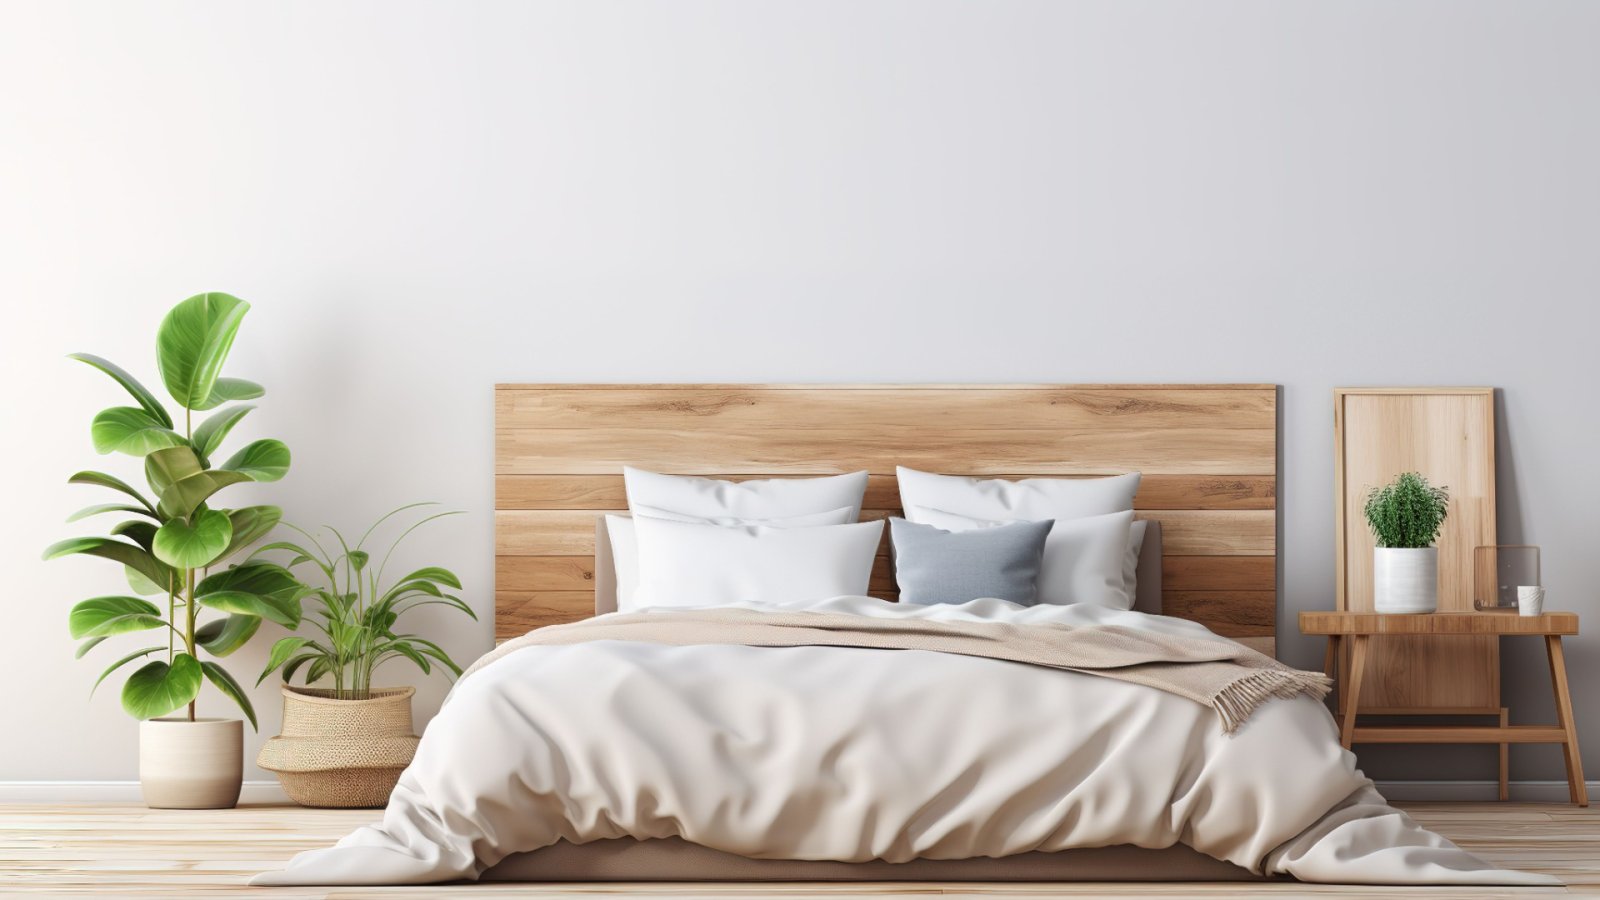 Tips and tricks for styling your sleep space as a minimalist bedroom